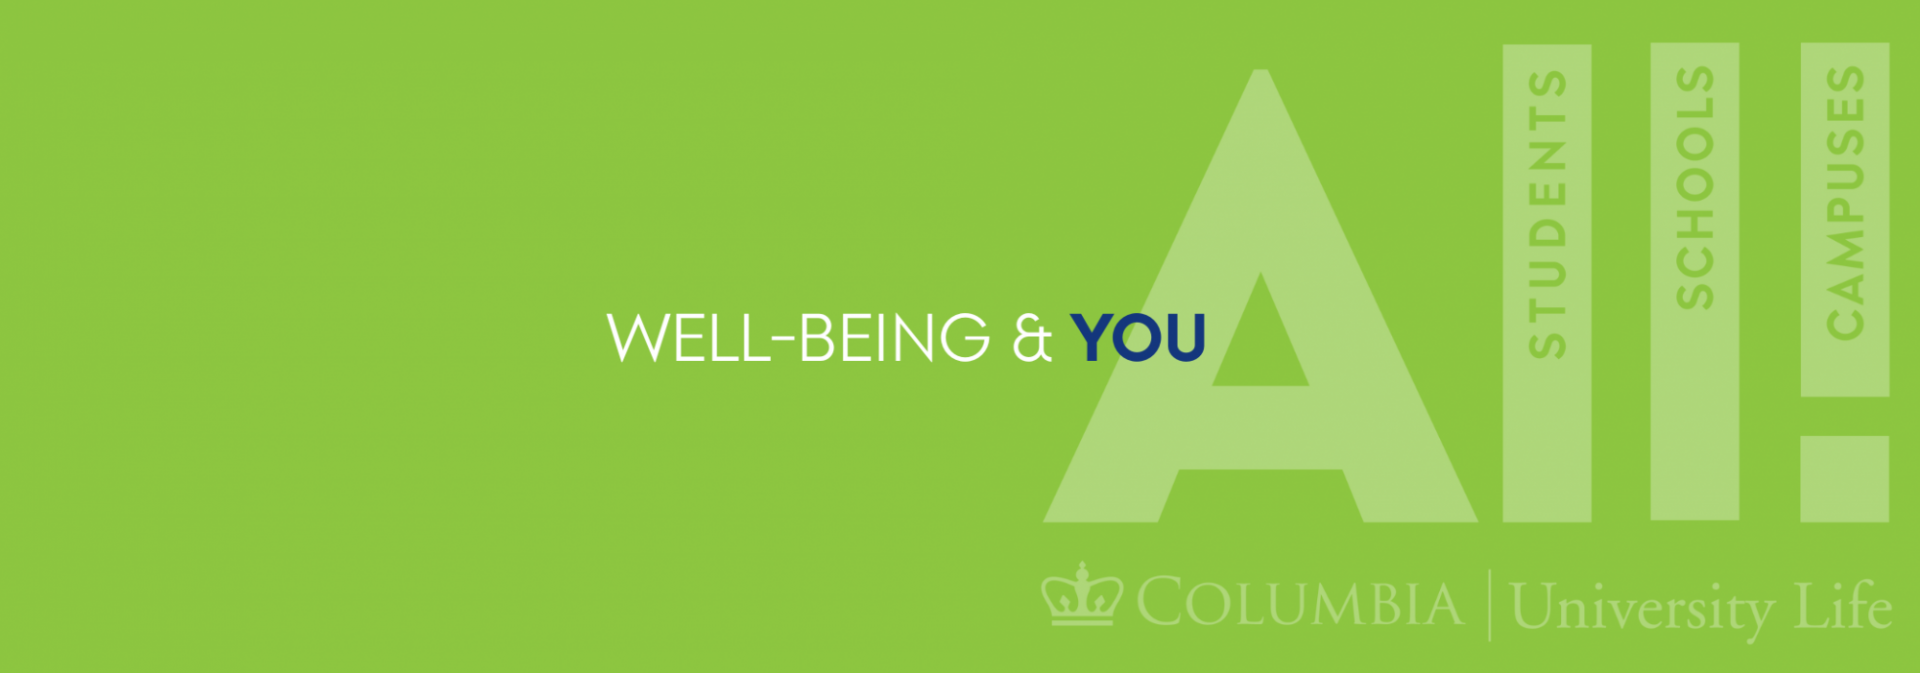 Well-being & You - University Life Logo